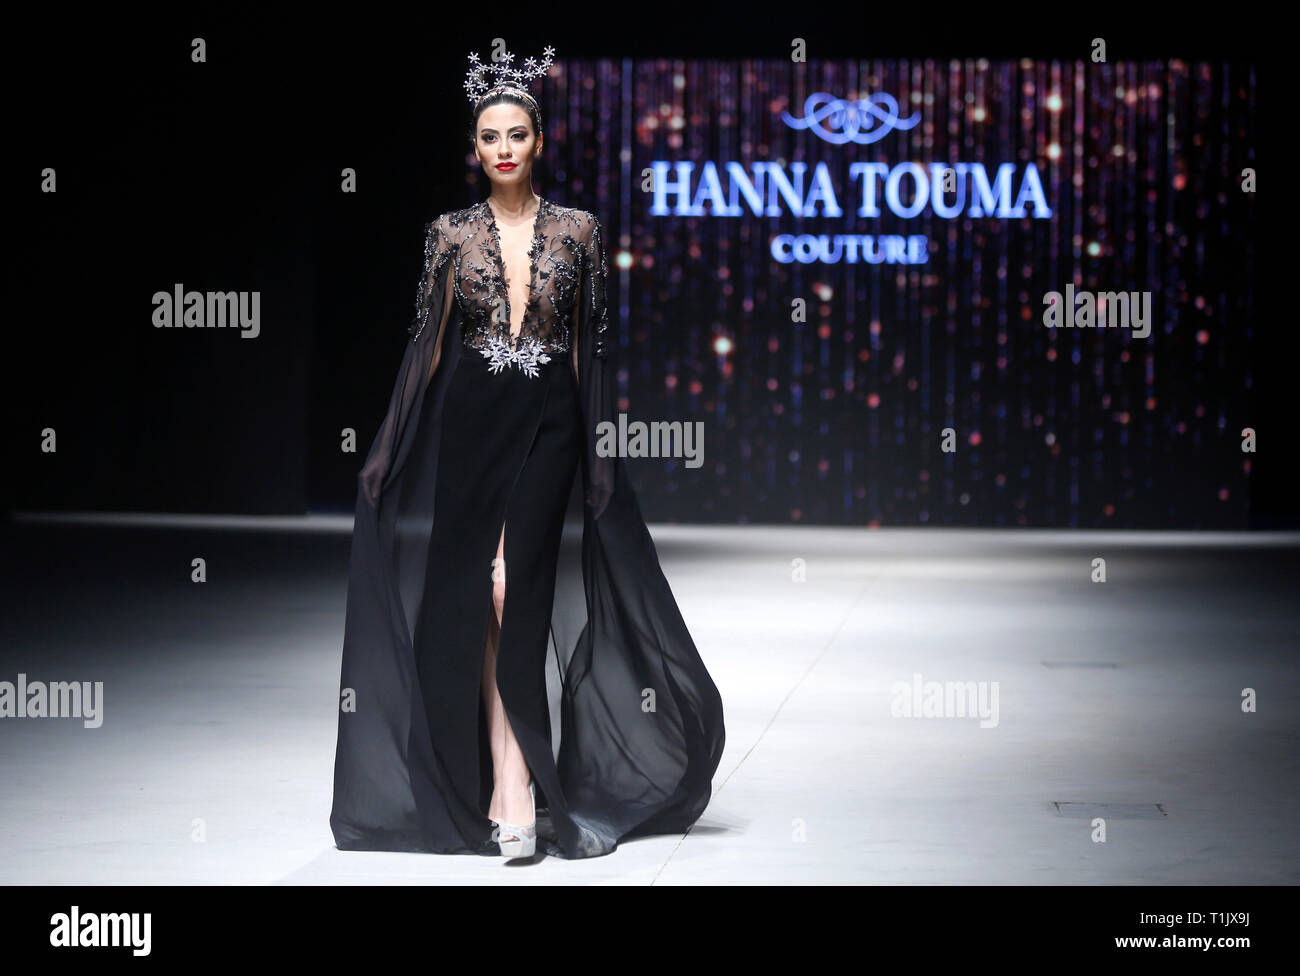 Beirut, Lebanon. 26th Mar, 2019. A model presents a creation by Lebanese couture  Hanna Touma during the Designers & Brands fashion show in Beirut, Lebanon,  on March 26, 2019. The fashion show